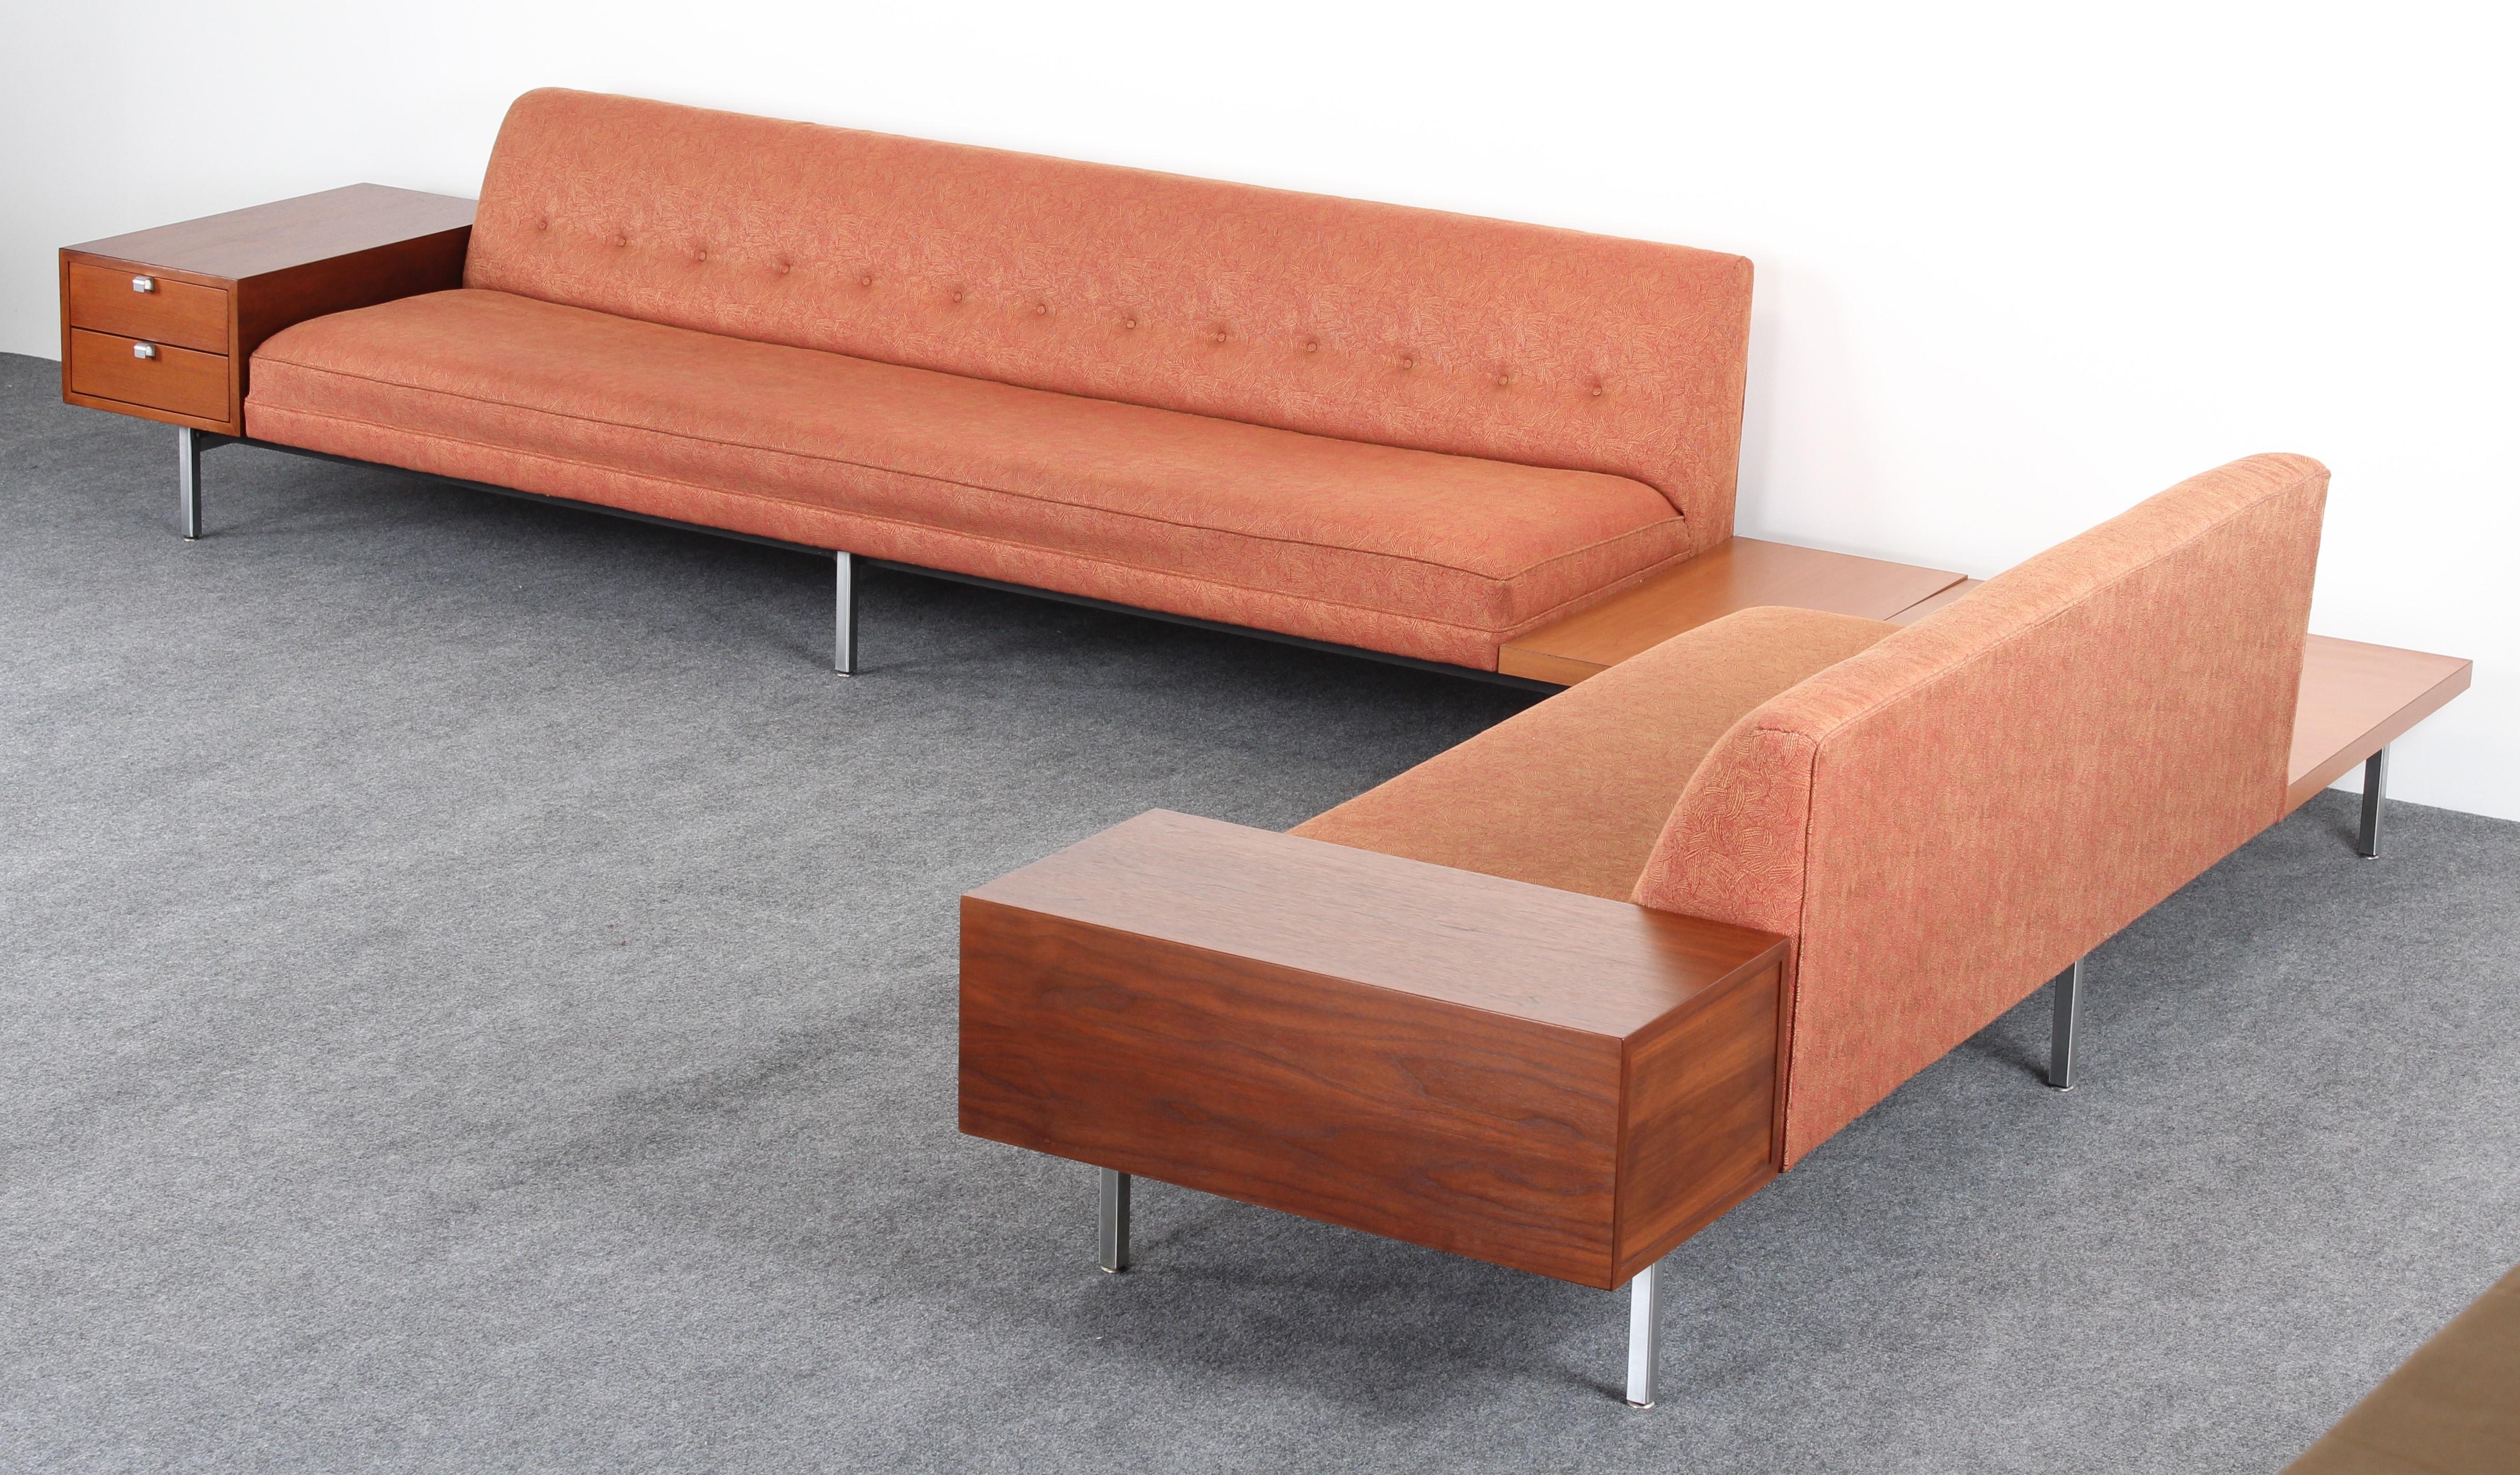 A pair of Mid-Century Modern sofas by George Nelson for Herman Miller. The sofas are constructed with a metal frame and square chrome-plated legs. The vintage sofas have original upholstery. The functional sofa set includes two walnut drawer end